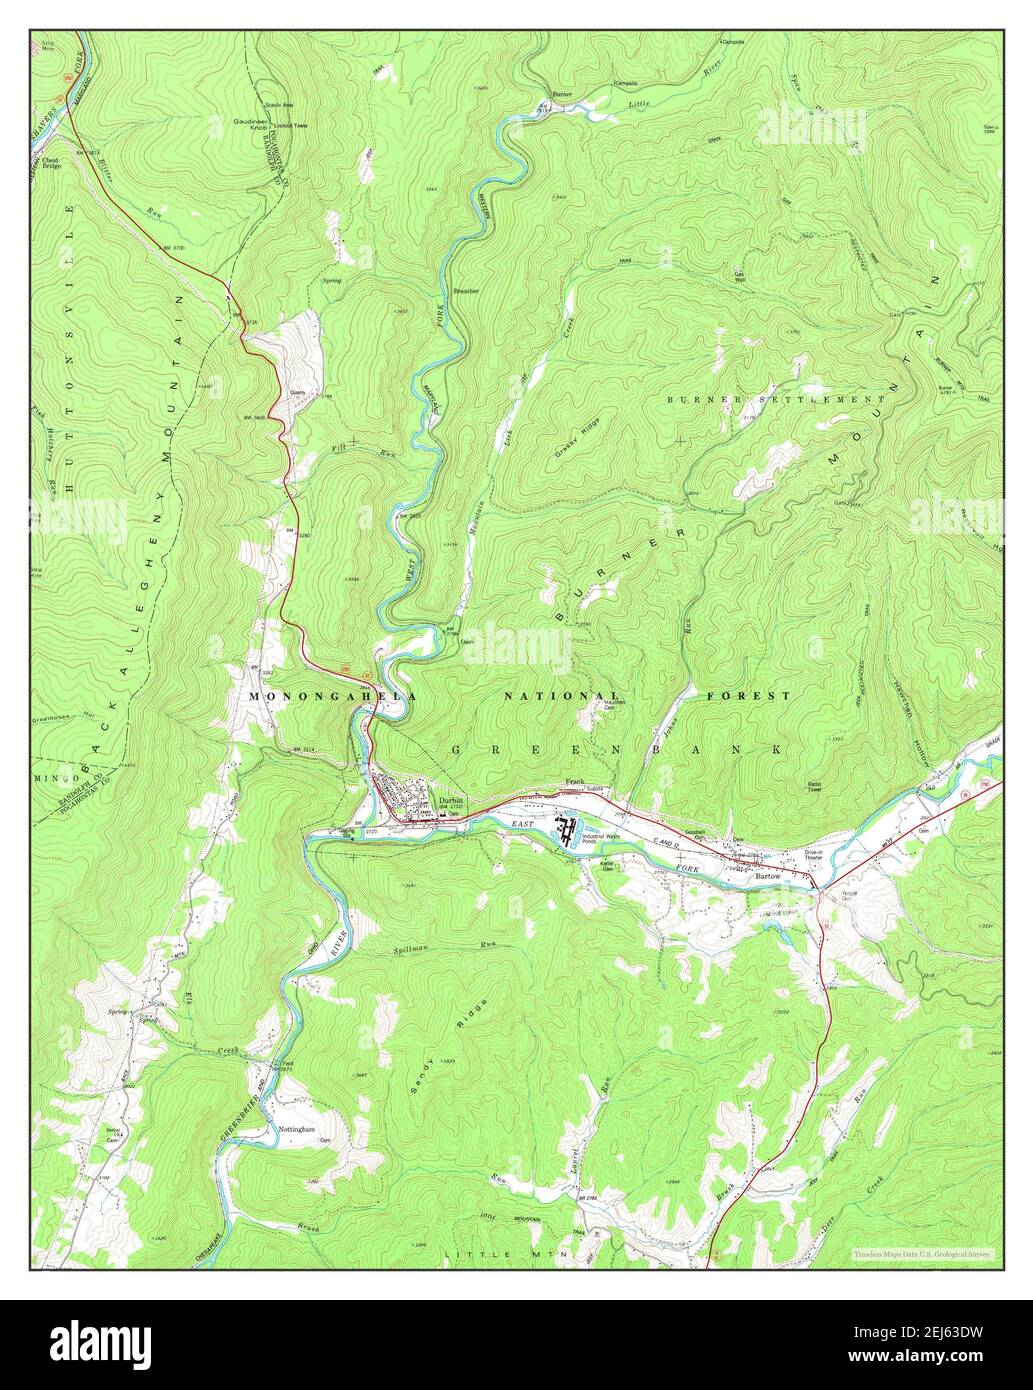 Durbin, West Virginia, map 1977, 1:24000, United States of America by Timeless Maps, data U.S. Geological Survey Stock Photo